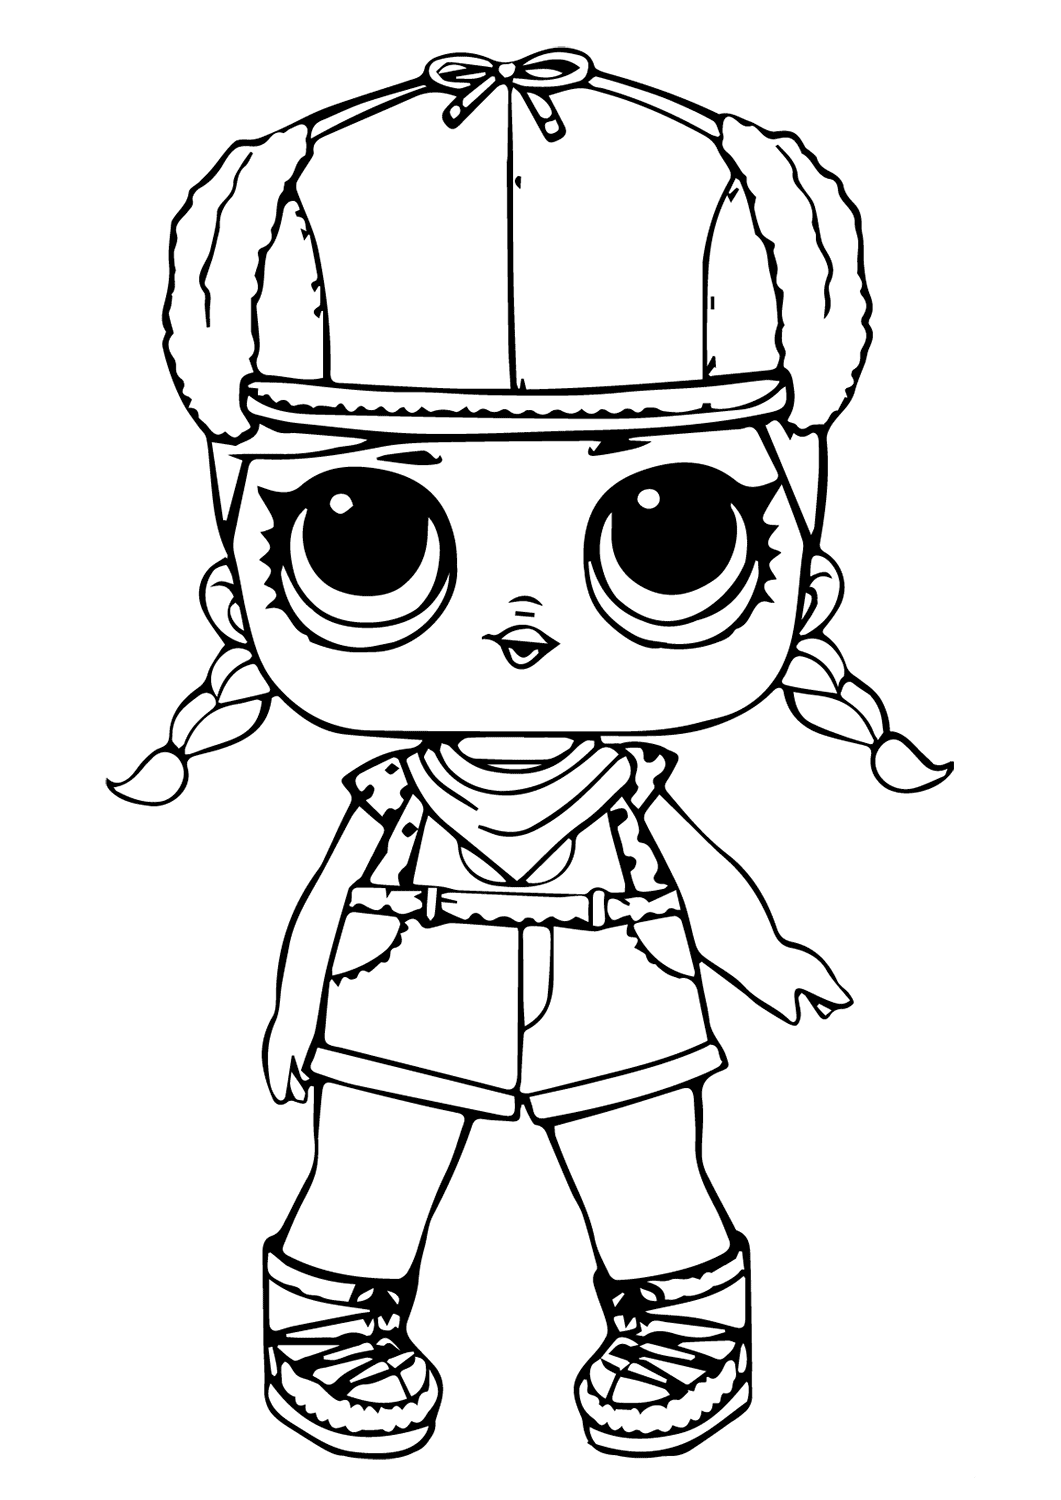 40 Free Printable LOL Surprise Dolls Coloring Pages